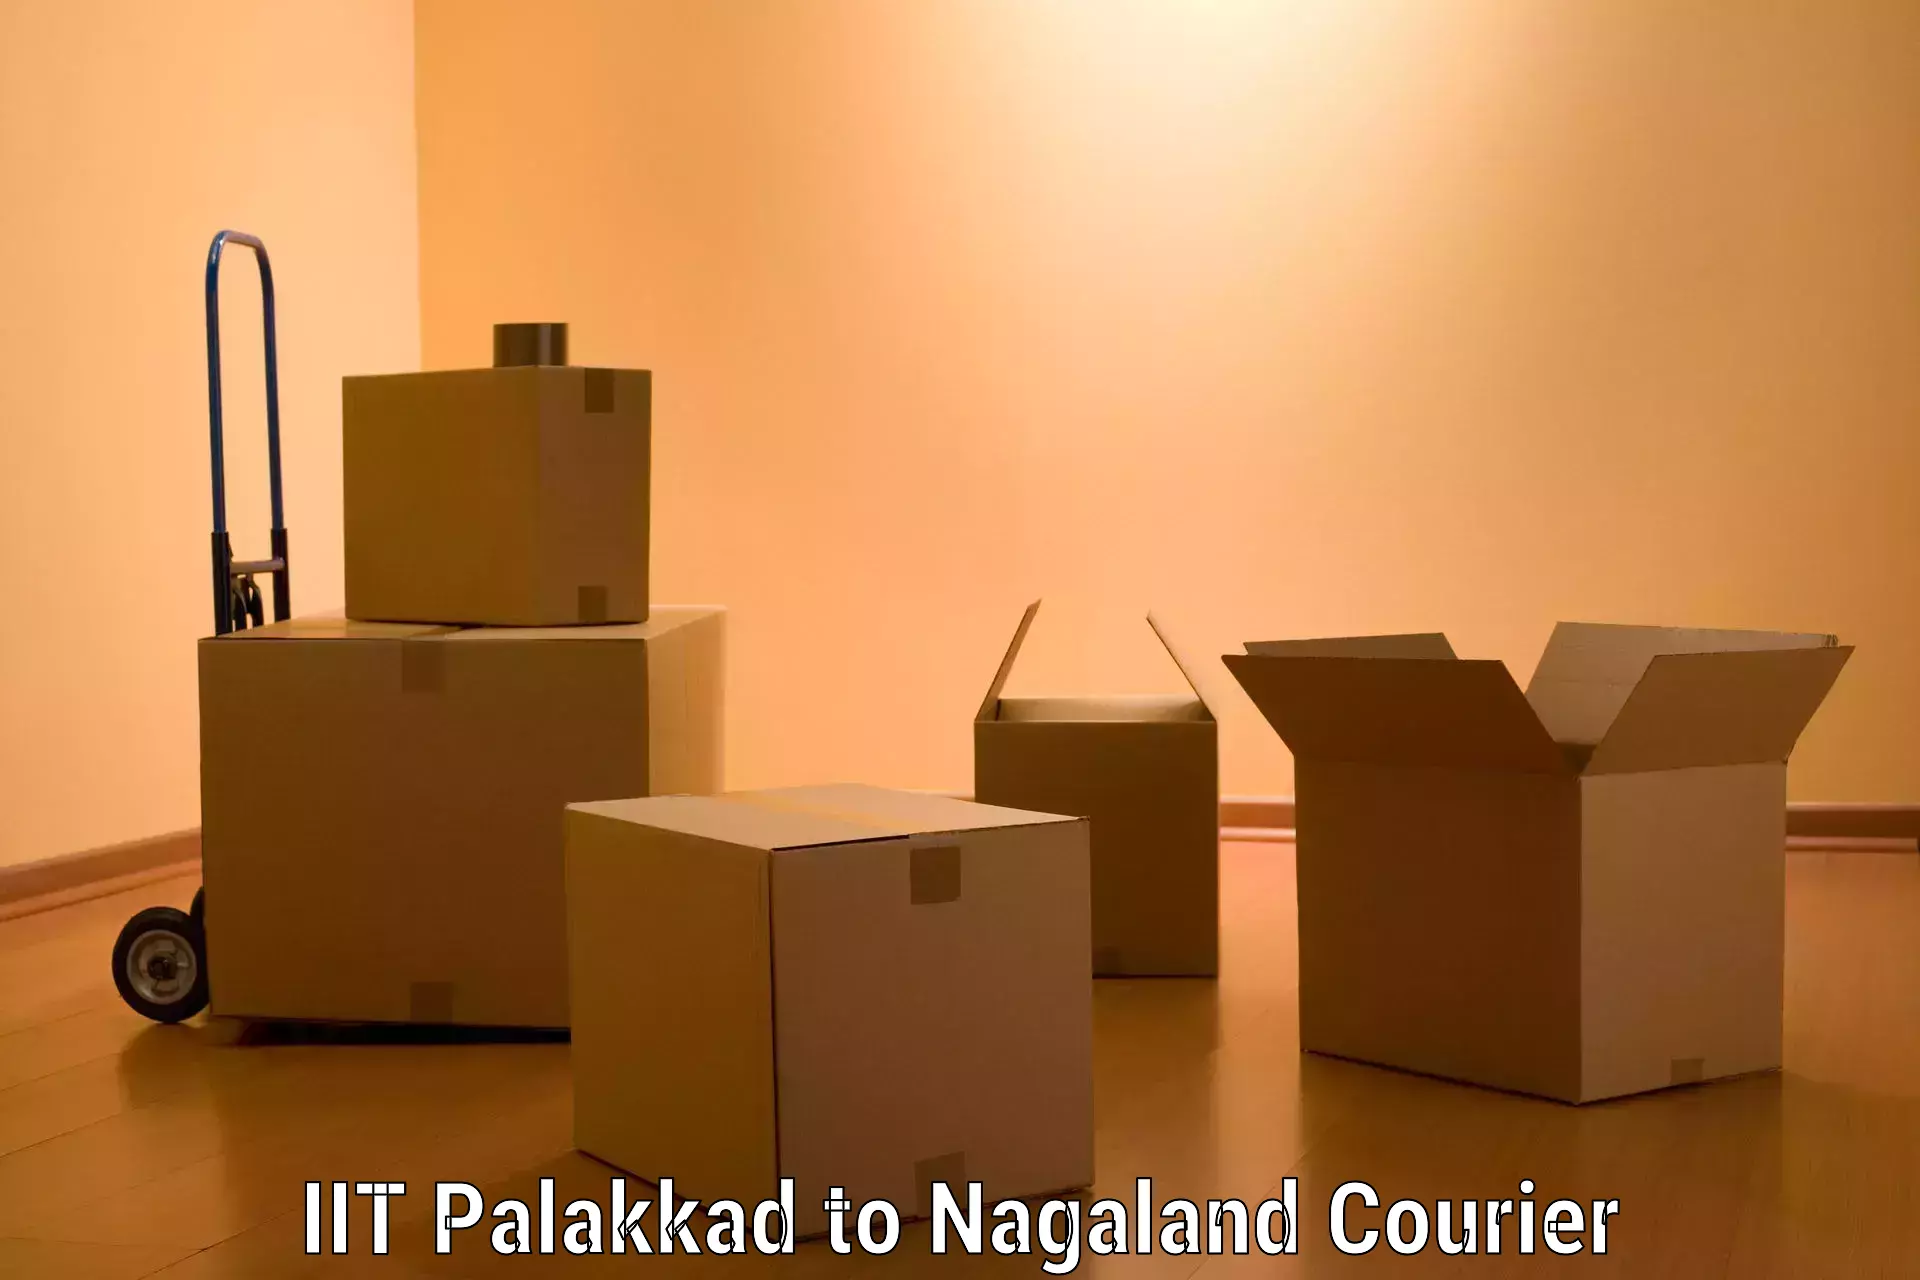 Professional relocation services IIT Palakkad to Nagaland